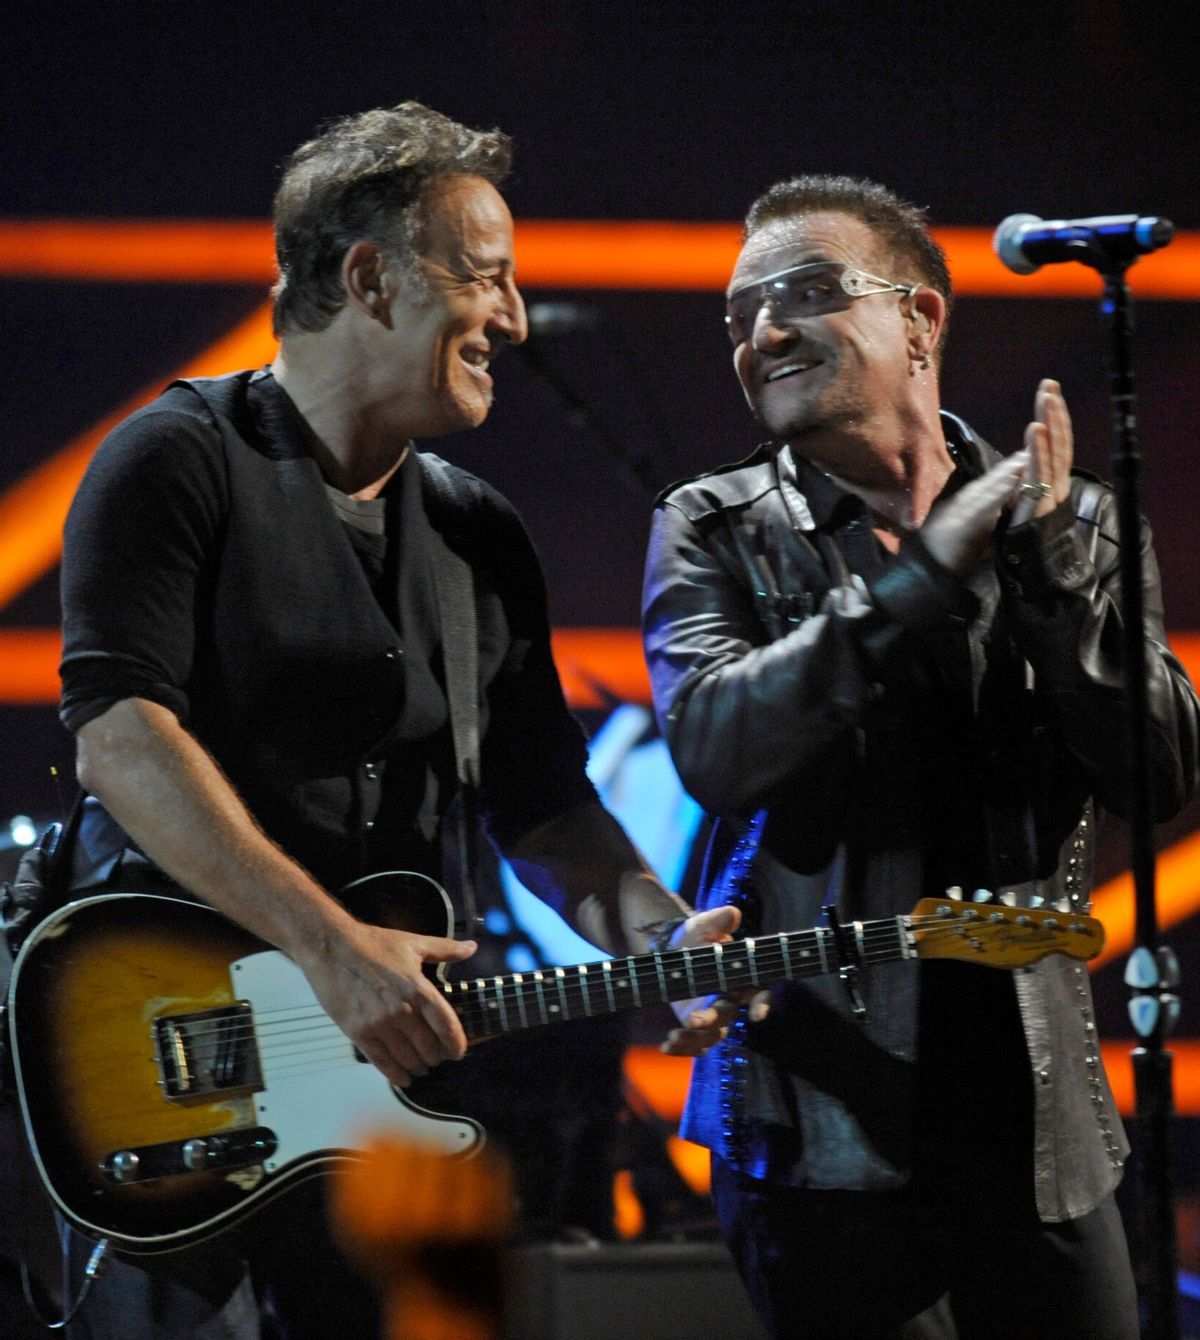 FILE - In this Oct. 30, 2009 file photo, Bono, right, and Bruce Springsteen perform at the 25th Anniversary Rock & Roll Hall of Fame concert at Madison Square Garden, in New York. Springsteen and Coldplays Chris Martin will act as Bono at a concert Monday night, Dec. 1, 2014, in New York City. U2 announced on its website that the singers will perform at Duffy Square in Times Square alongside Kanye West and Carrie Underwood for U2 Minus 1 _ Live in New York Tonight. (AP Photo/Henny Ray Abrams, File)  (AP)